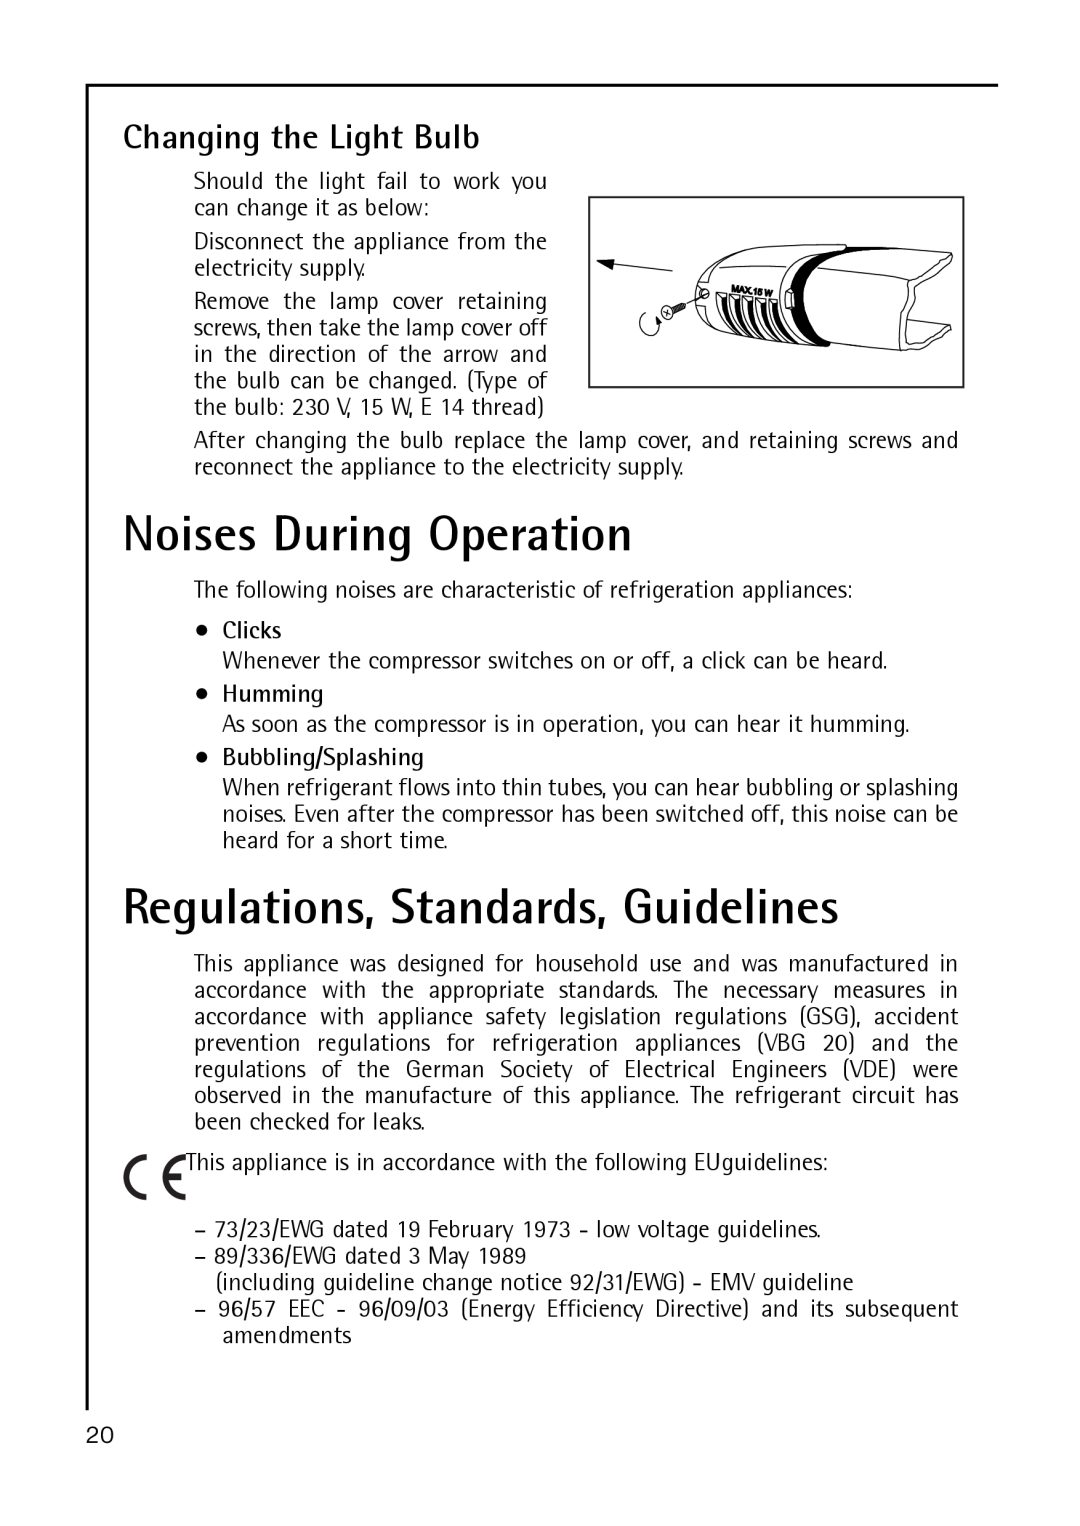 Electrolux S 70178 TK38 manual Noises During Operation, Regulations, Standards, Guidelines, Changing the Light Bulb, Clicks 